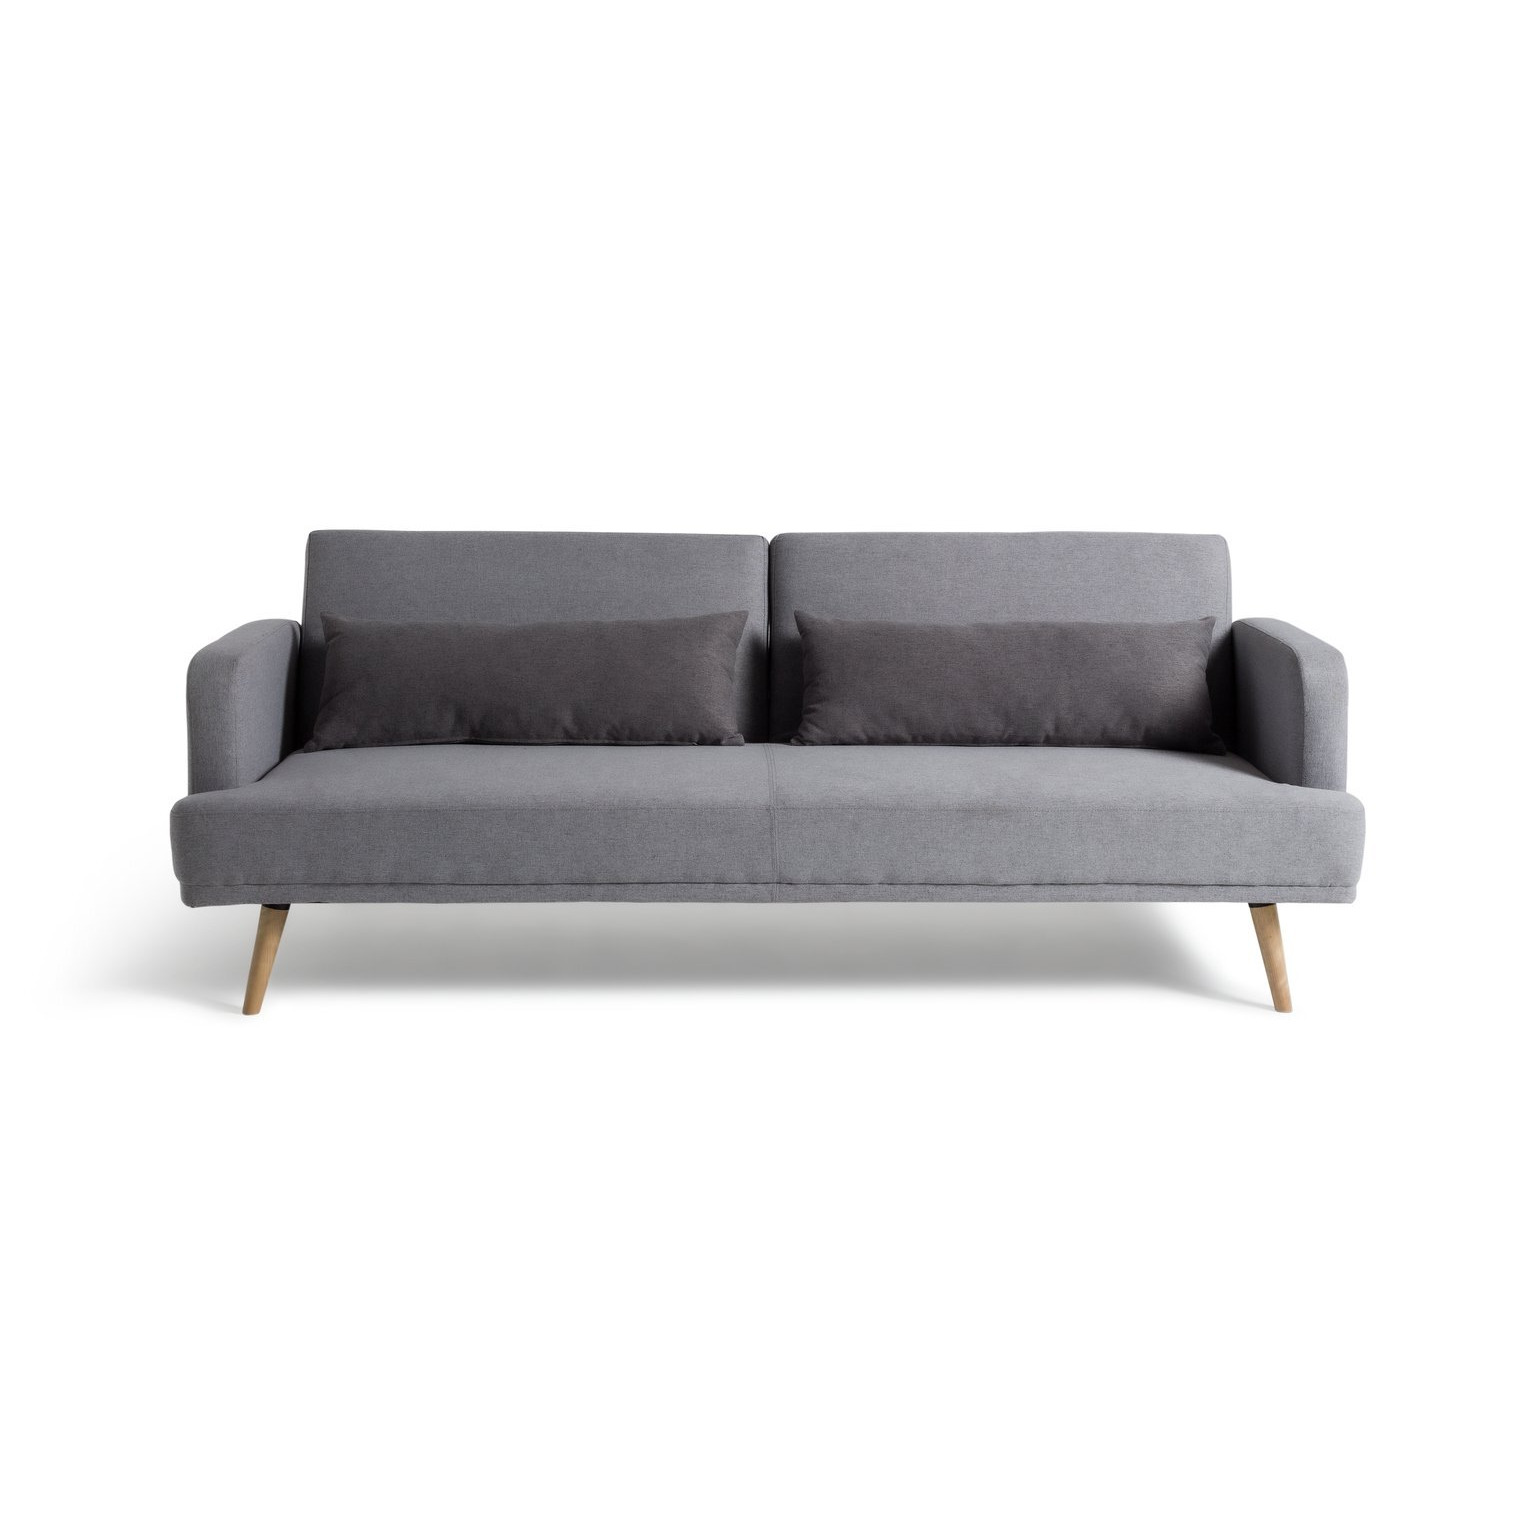 Buy Habitat Andy Fabric 3 Seater Clic Clac Sofa Bed - Grey, Sofabeds